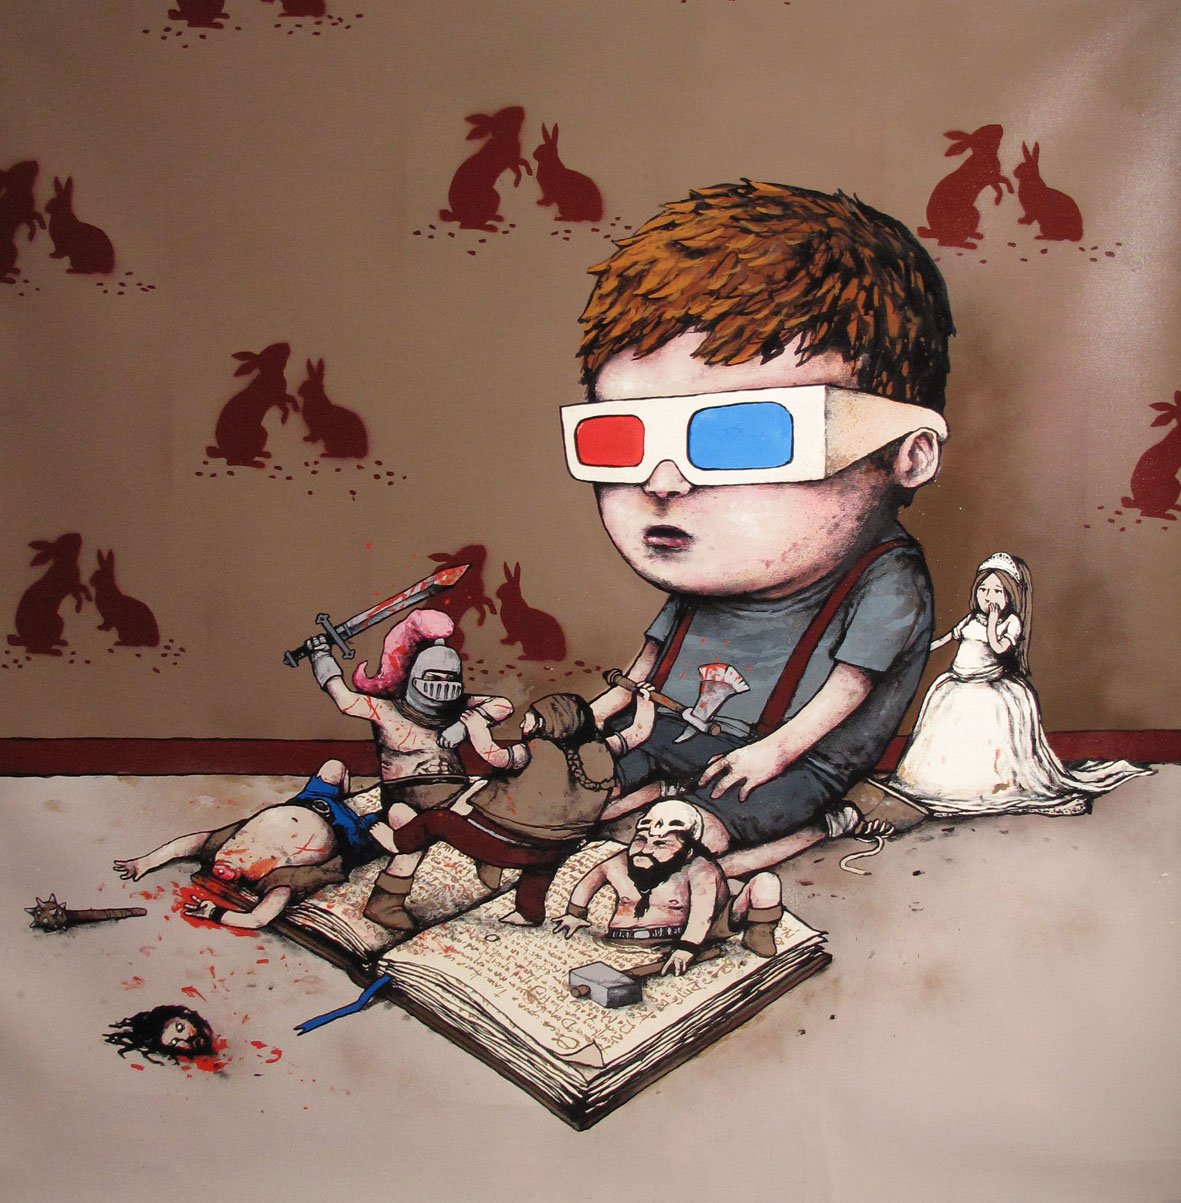 French artist Dran with black humor in his drawings ...